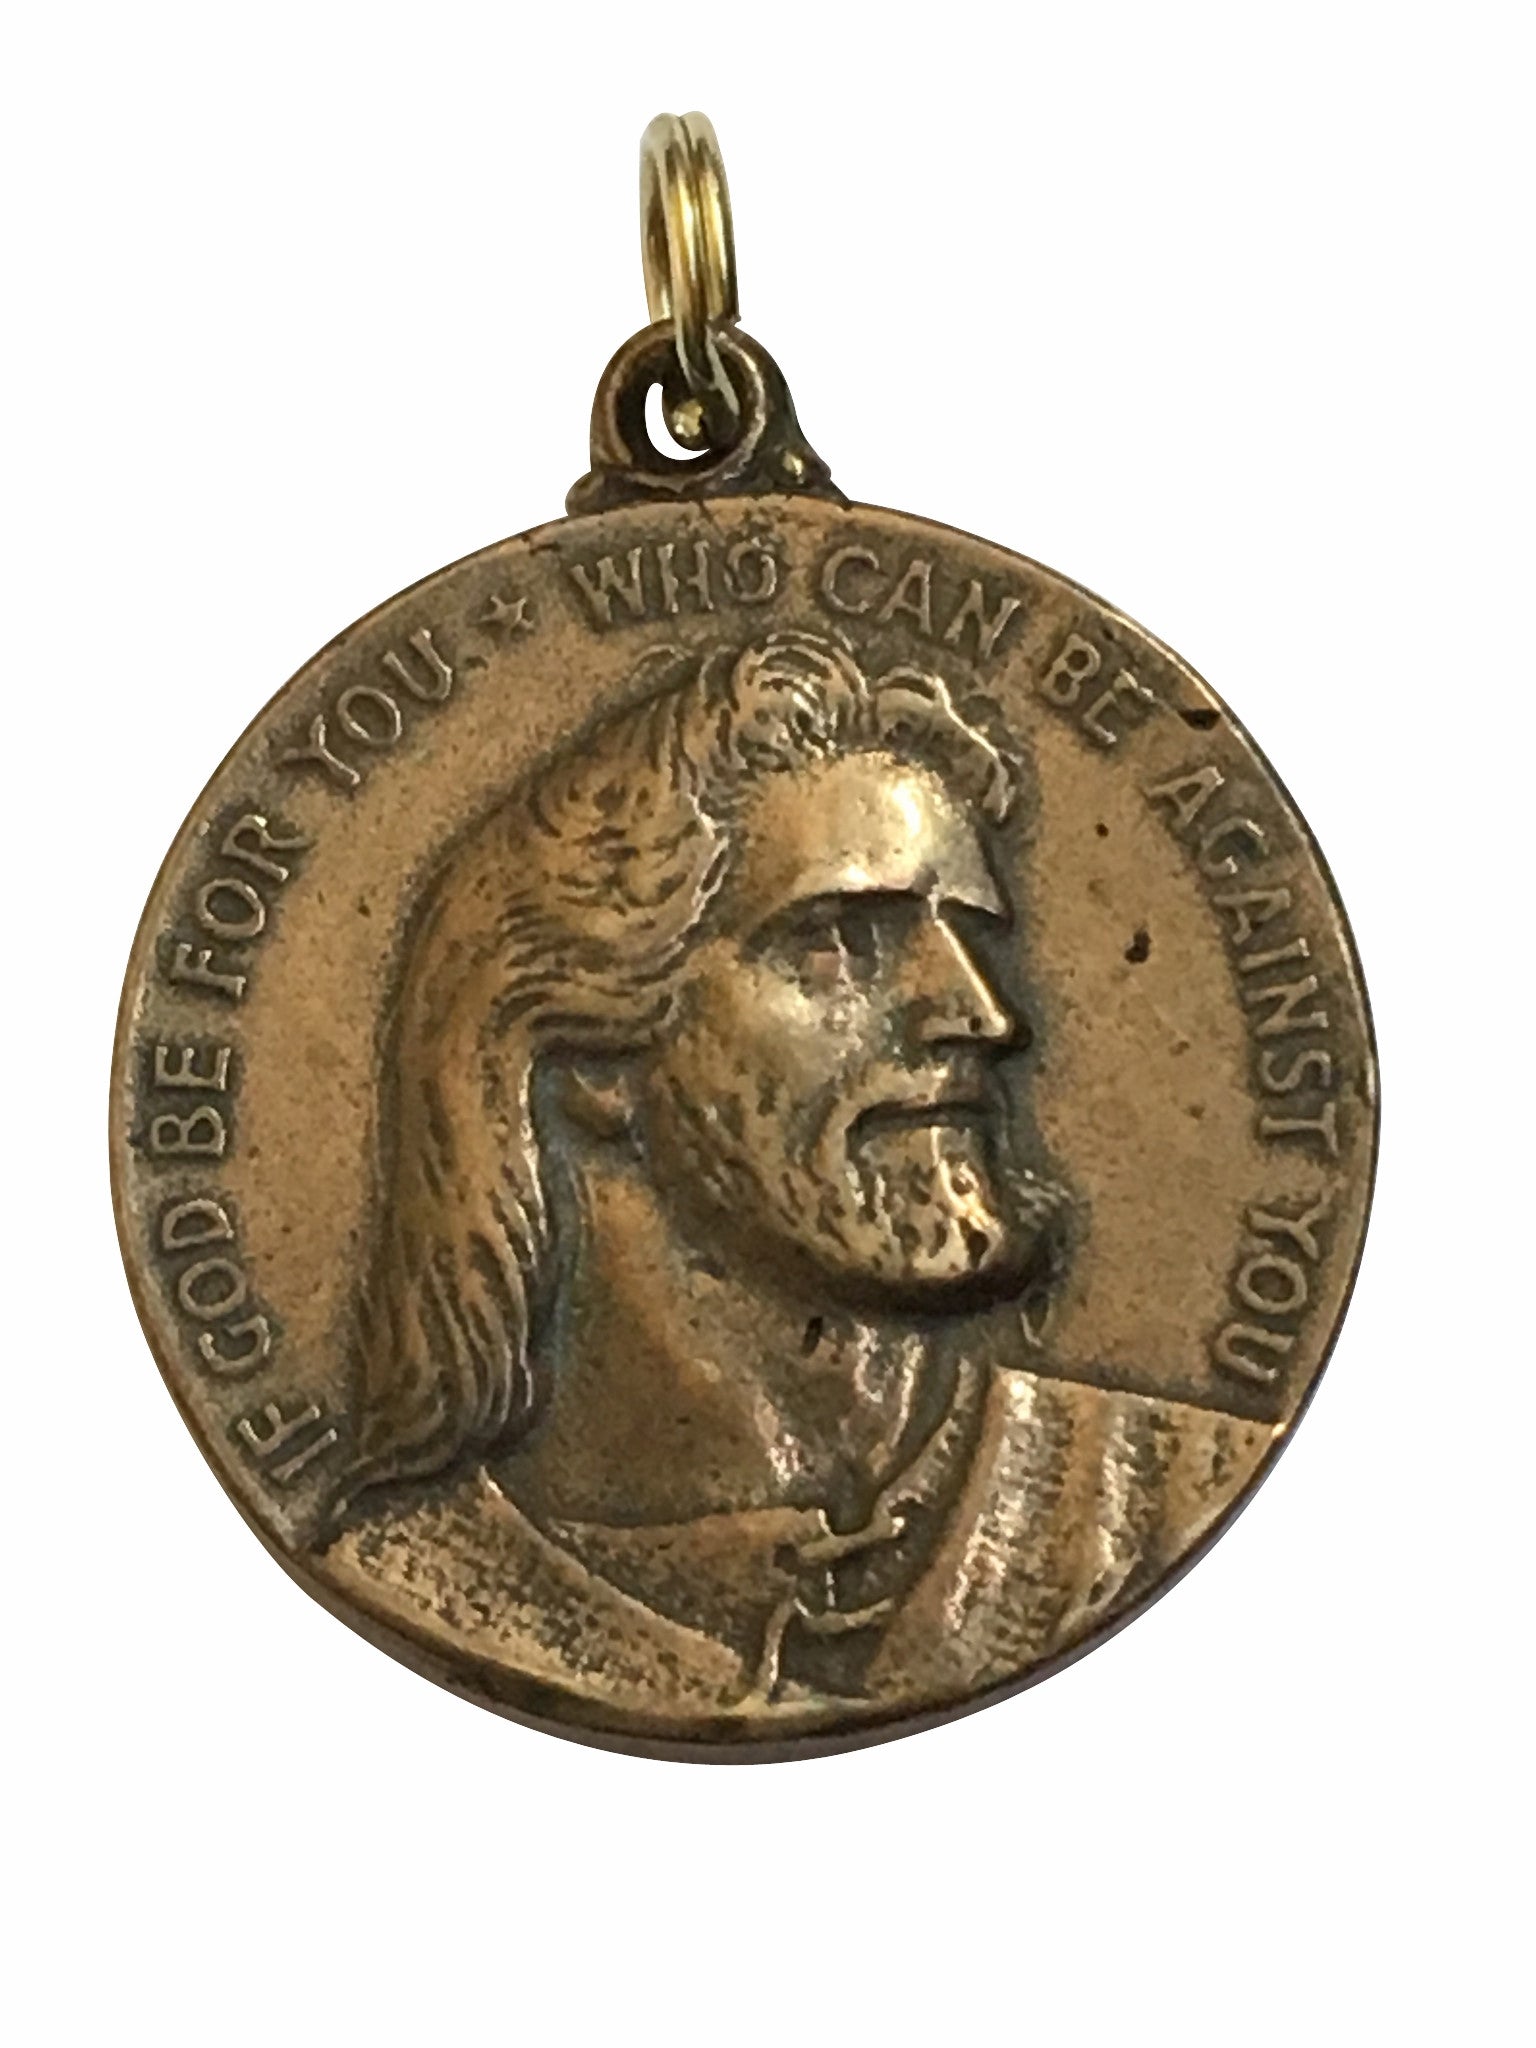 1st AA Chip: If God be for you, Who can be against you Jesus Scripture Medal